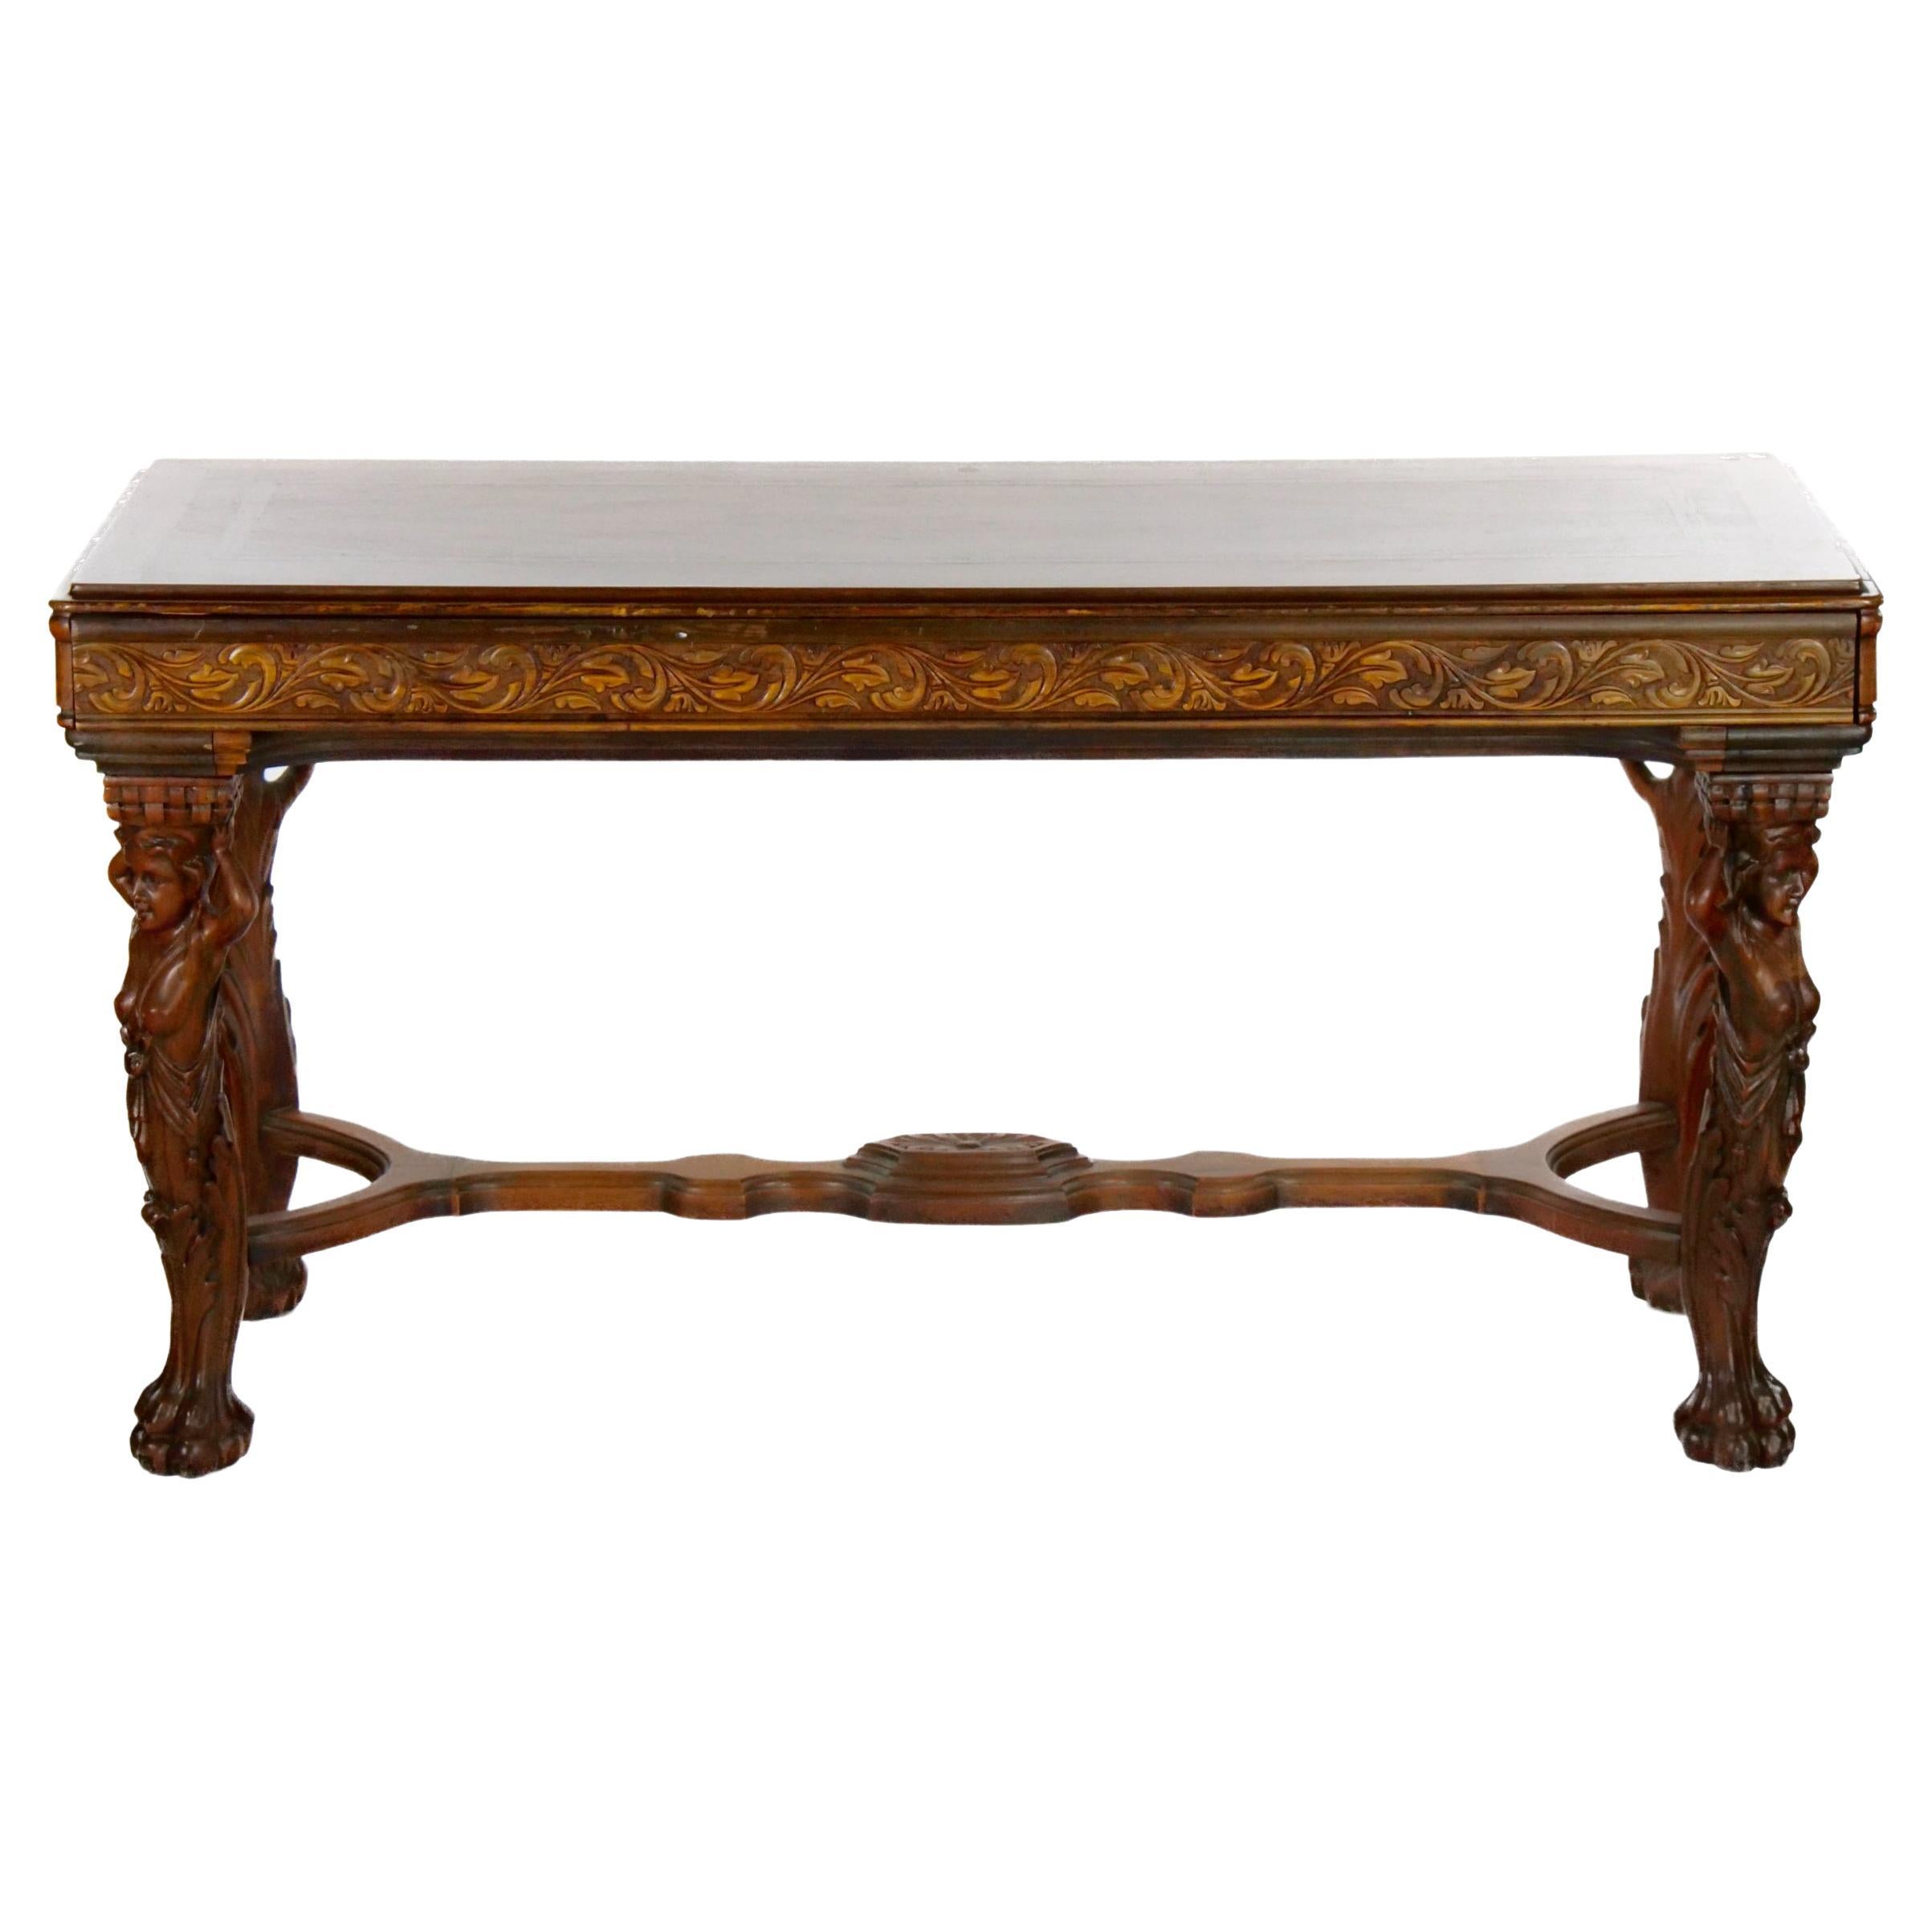 19th Century Heavily Hand Carved Inlaid Top Console / Center Table